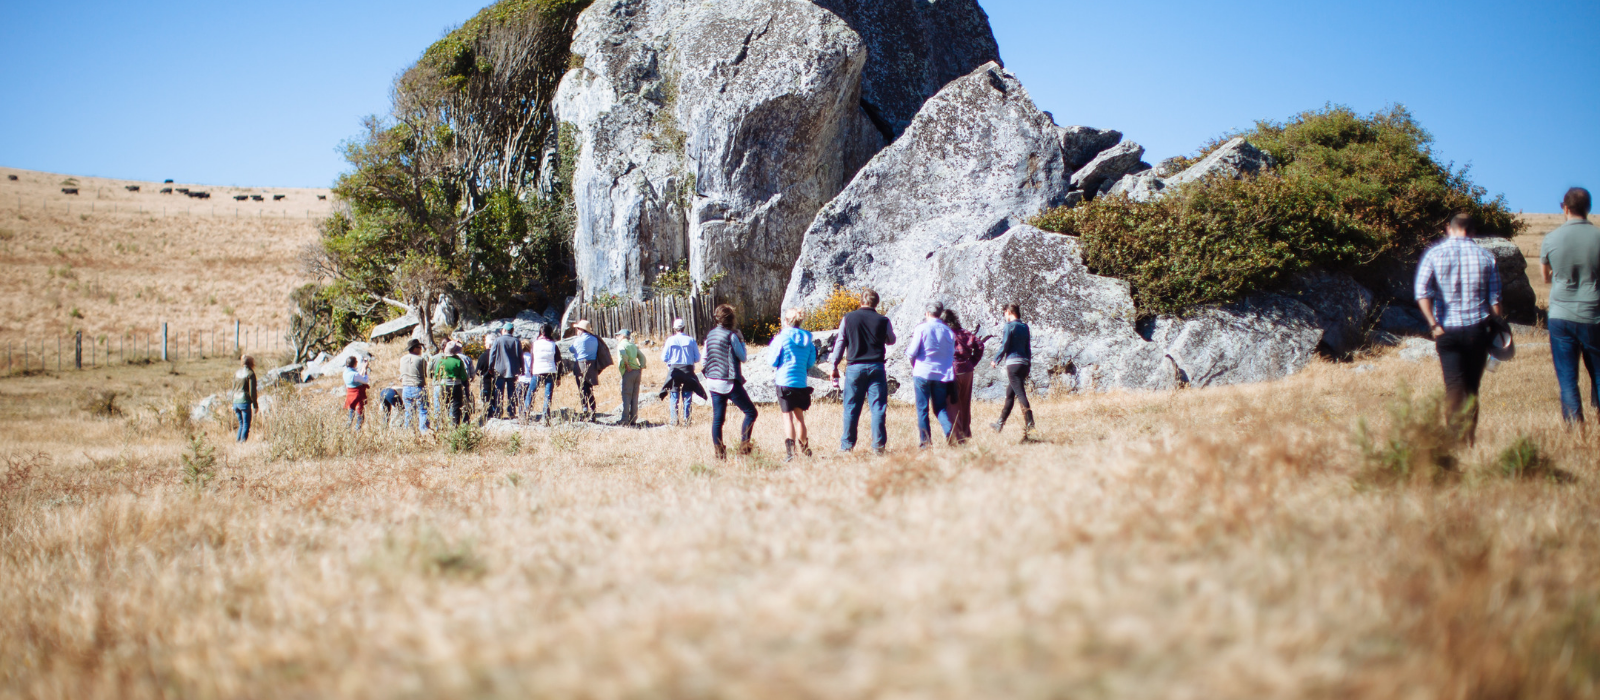 A group of people hiking in a golden field by large gray boulders